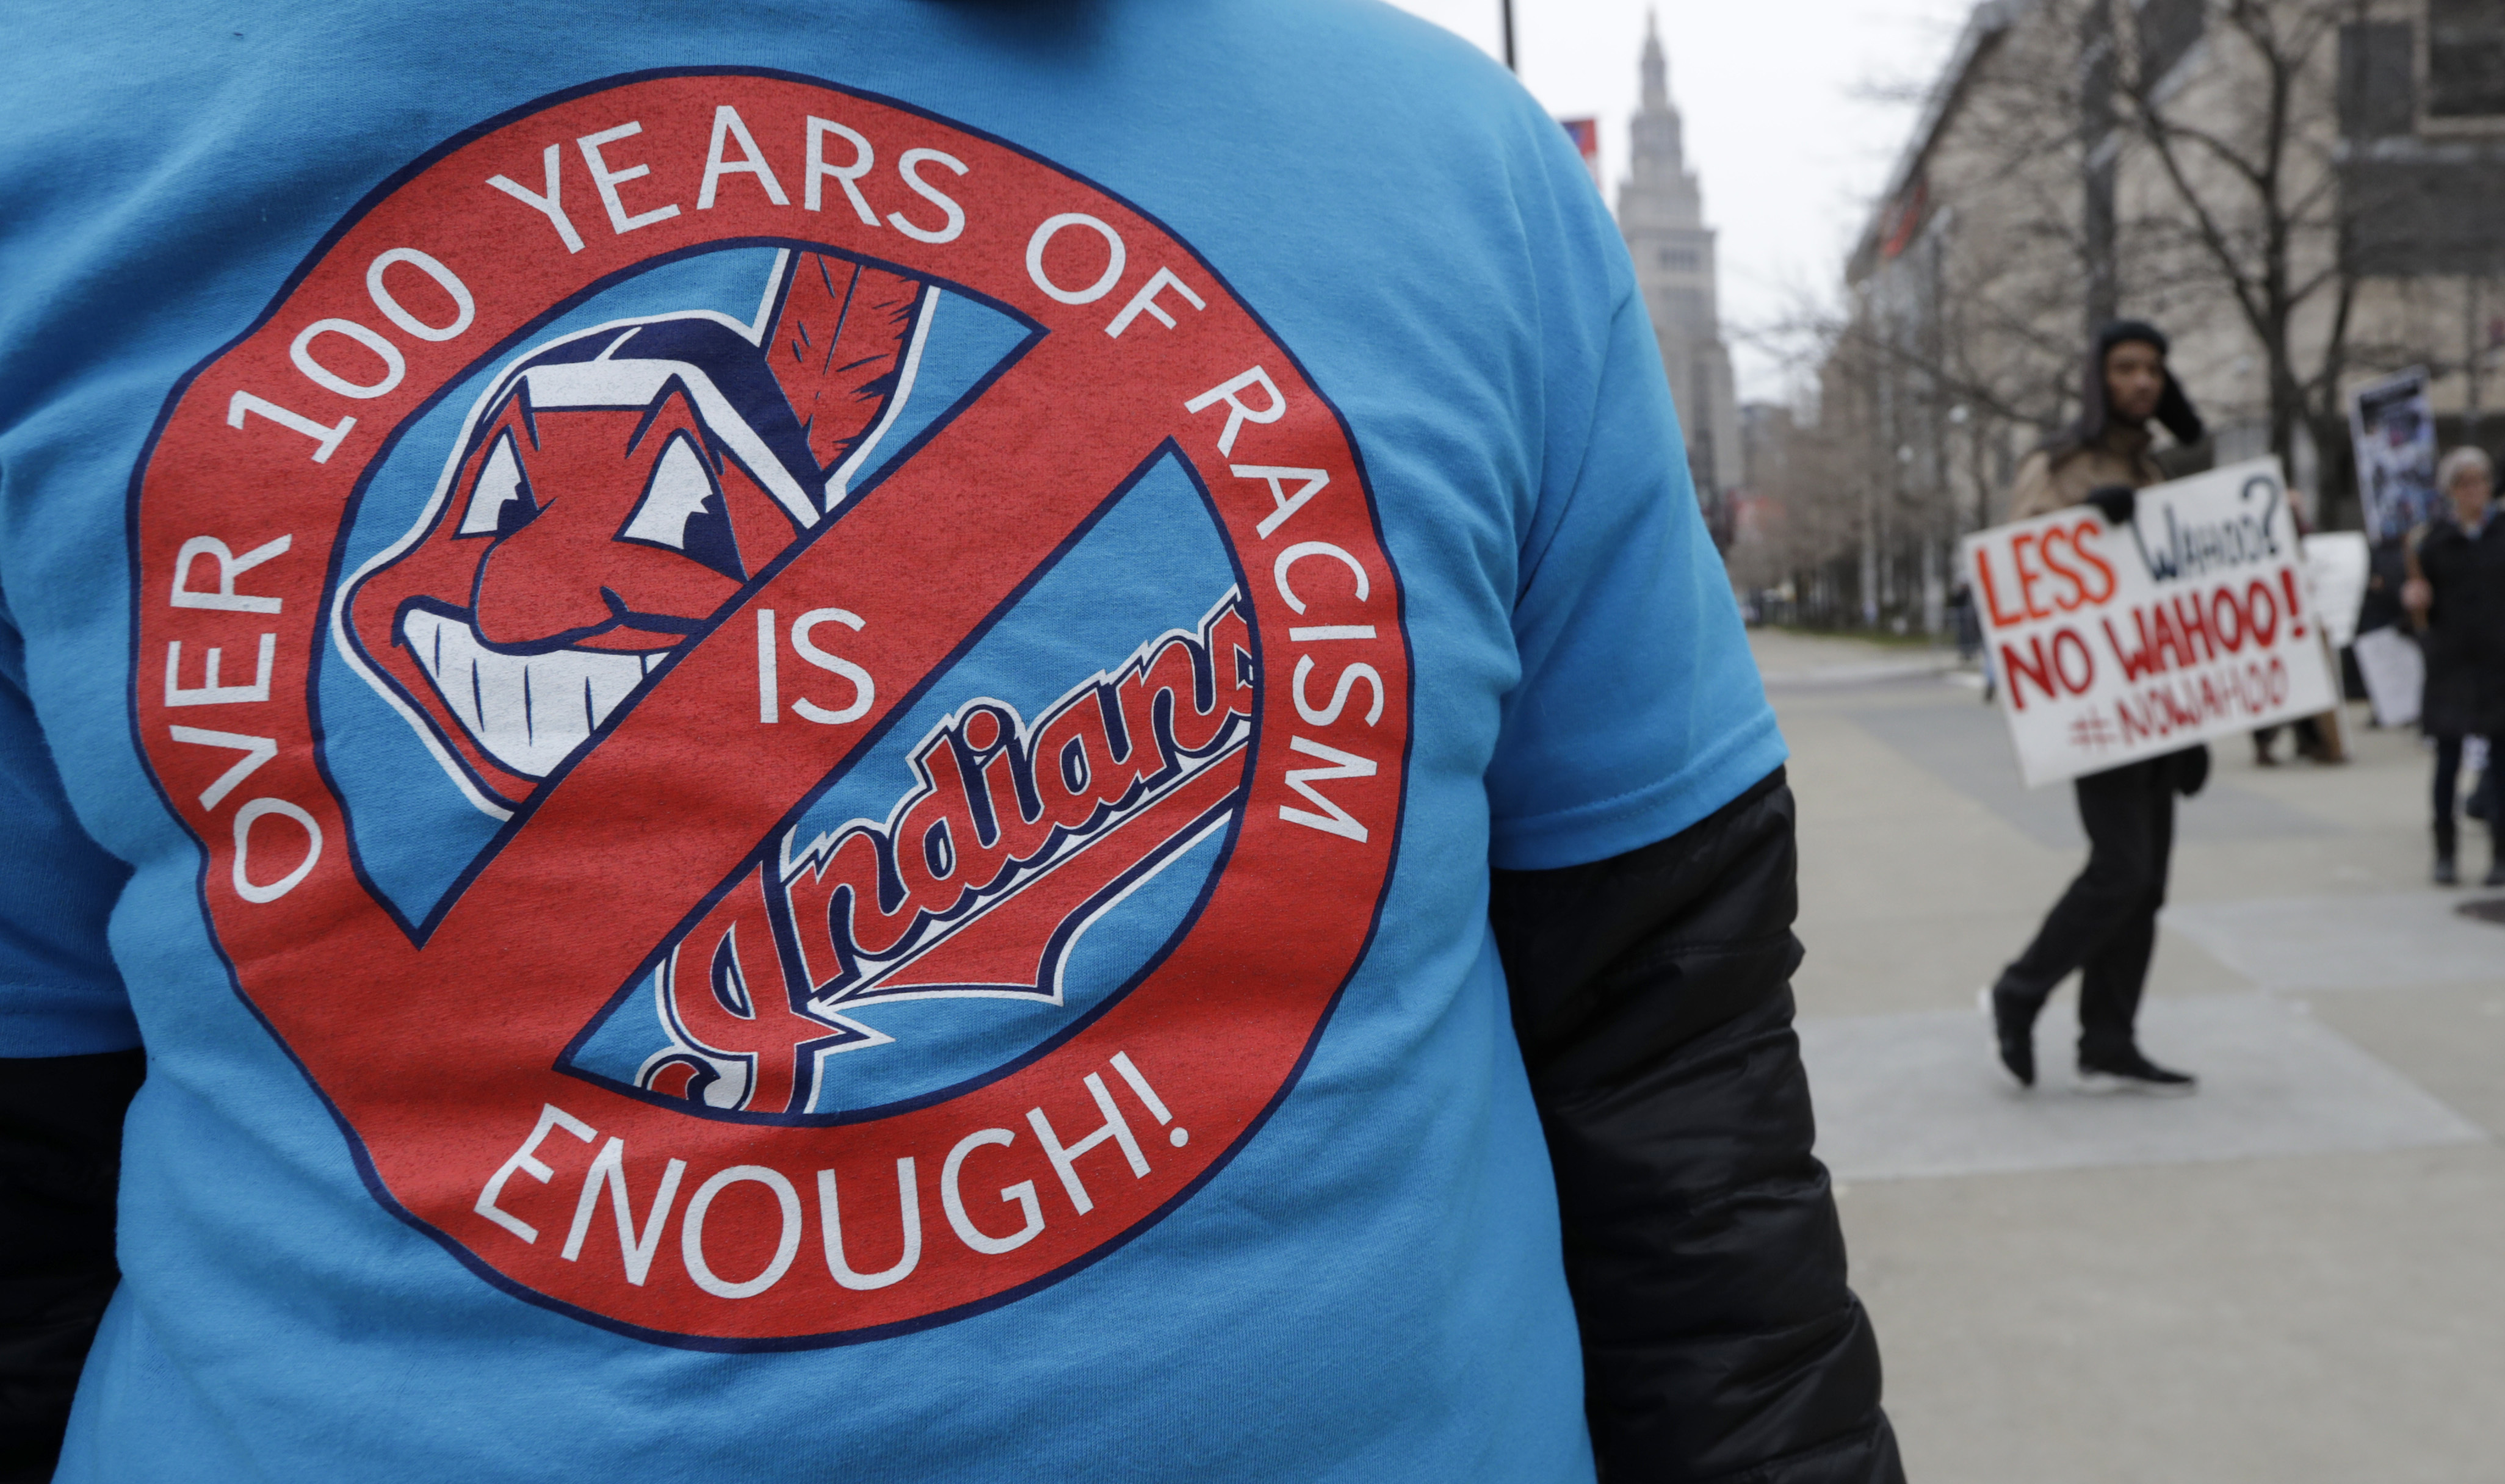 Indians to remove Chief Wahoo logo from uniforms in 2019